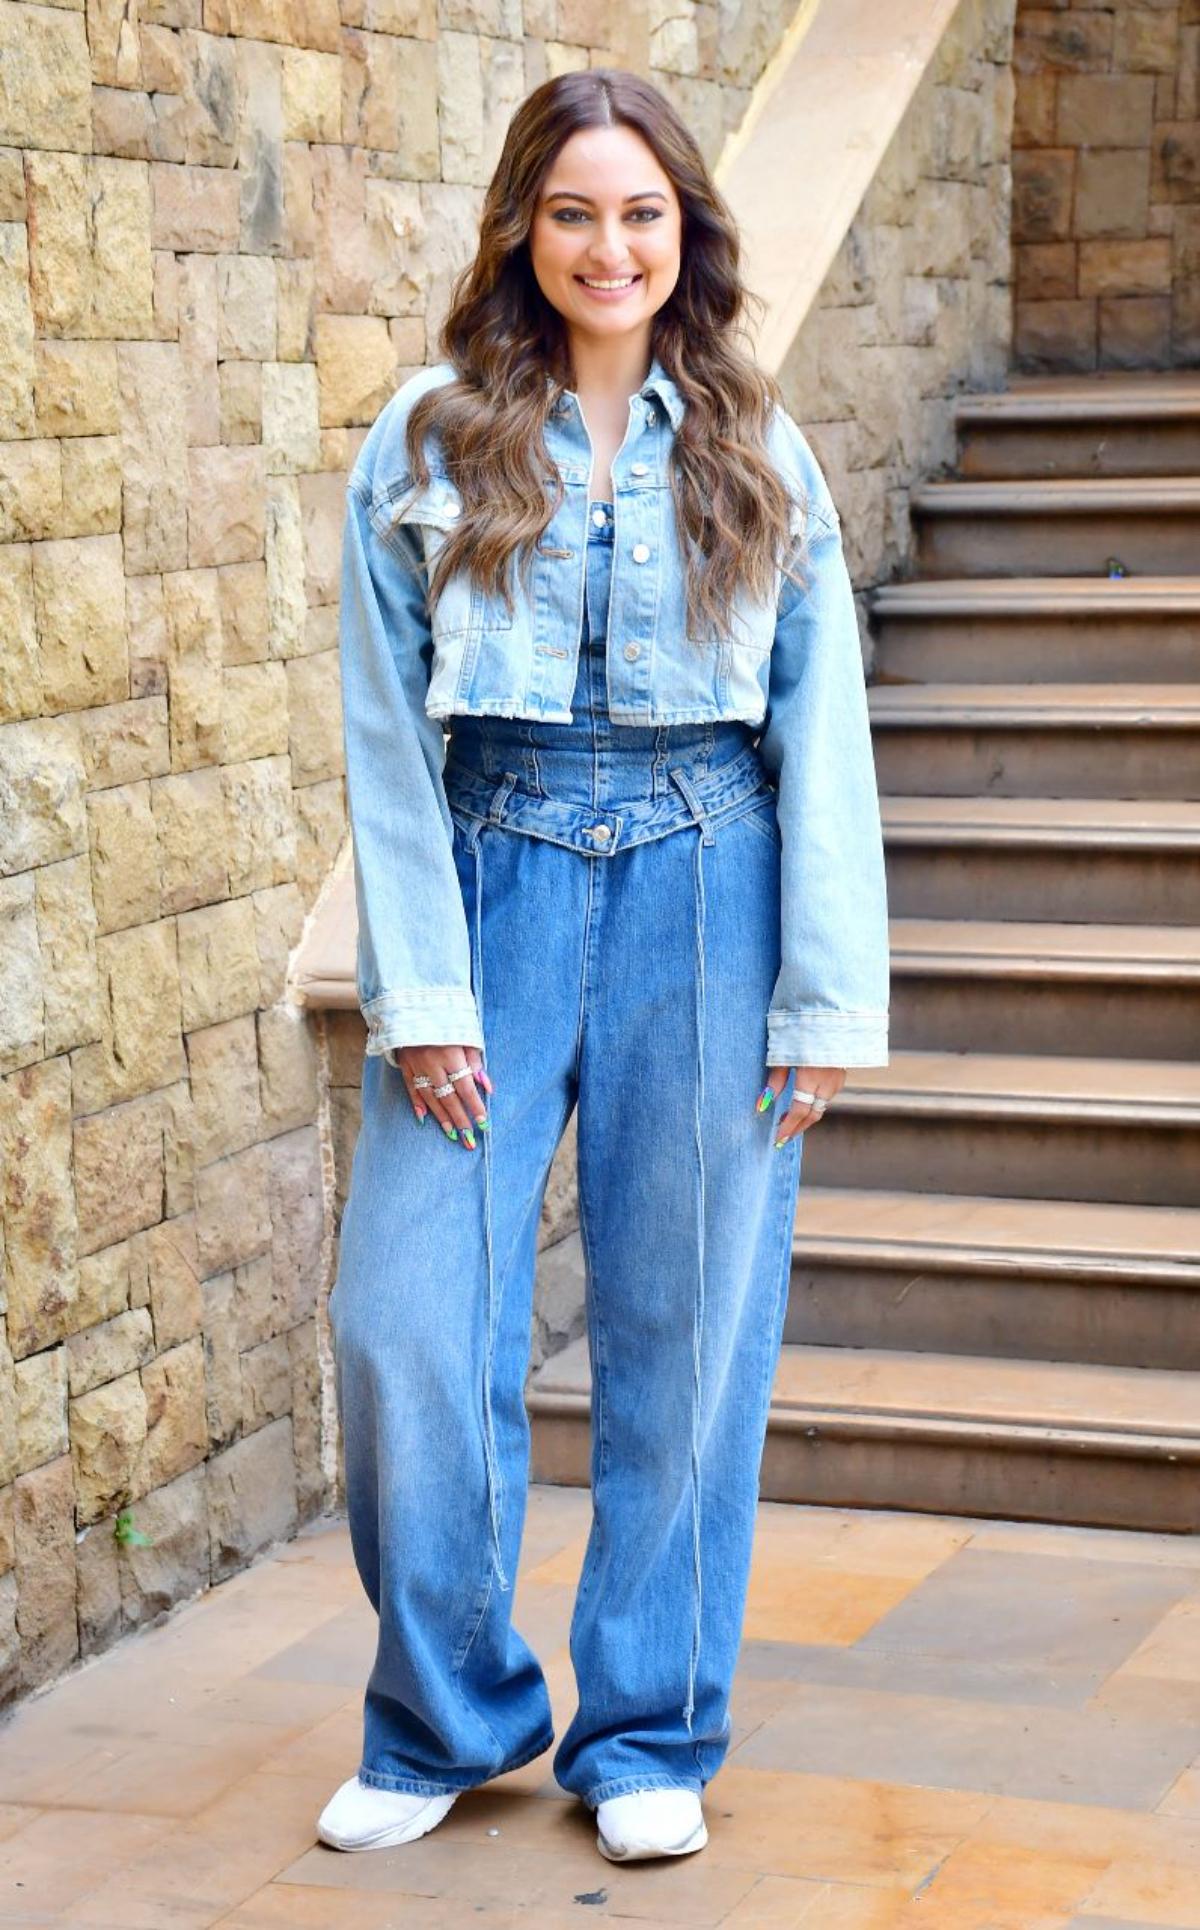 Sonakshi Sinha who will be headlining the gritty and gripping crime-drama series, 'Dahaad', looks effortlessly edgy as she pulls off an all-denim ensemble with grace and elan. Donning a denim corset top along with loosely fit boyfriend jeans, the 'Dabaang' star shows us how to rightly dress up the street way as she tops off her all-denim outfit with a chic light blue denim jacket. While Sona wore white sneakers to look more comfy and chic, the actor painted her nails in vibrant neon colours to add some drama in her otherwise co-ordinated look. 